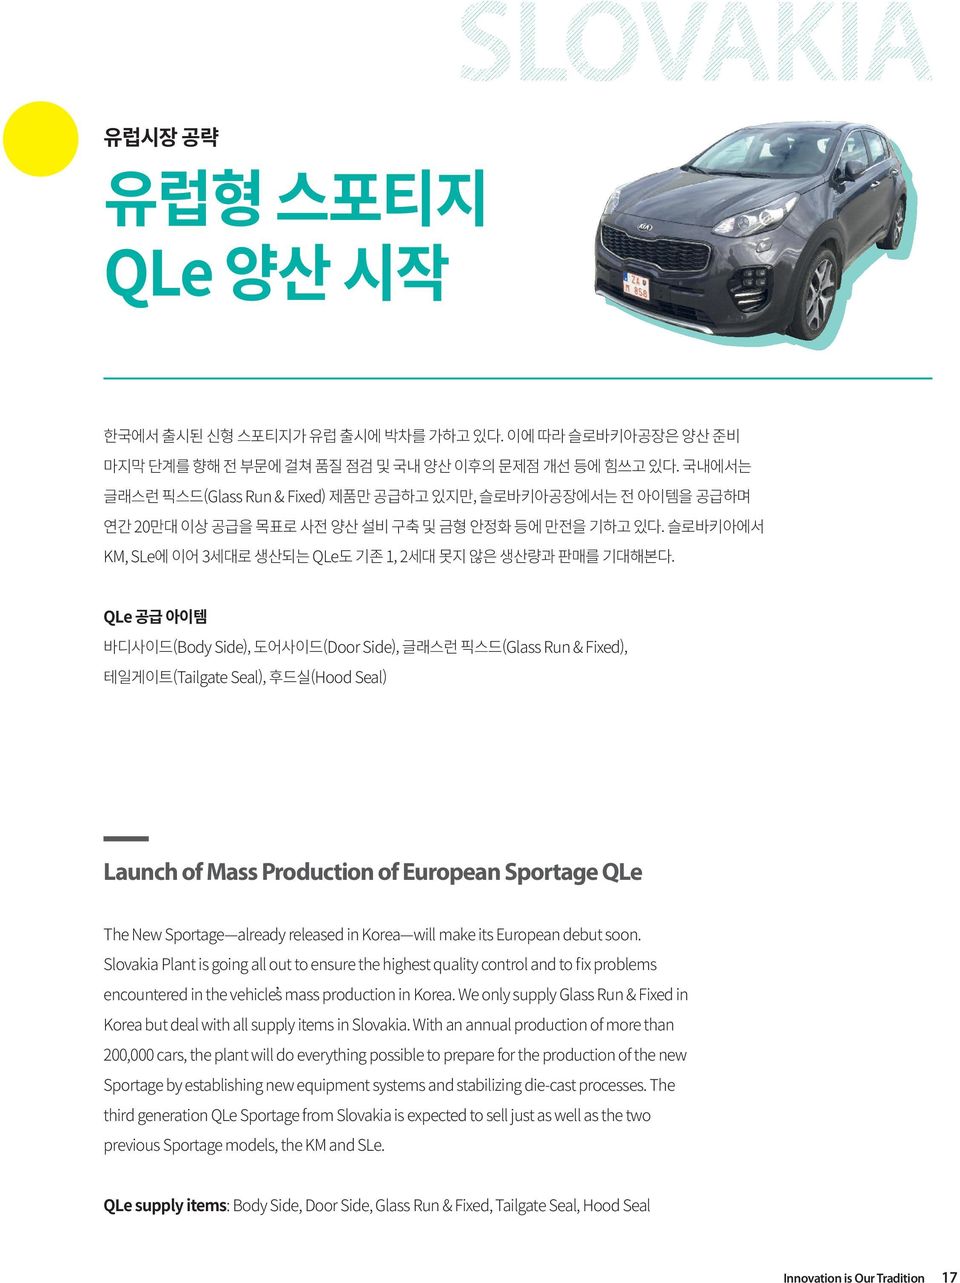 QLe 공급 아이템 바디사이드(Body Side), 도어사이드(Door Side), 글래스런 픽스드(Glass Run & Fixed), 테일게이트(Tailgate Seal), 후드실(Hood Seal) Launch of Mass Production of European Sportage QLe The New Sportage already released